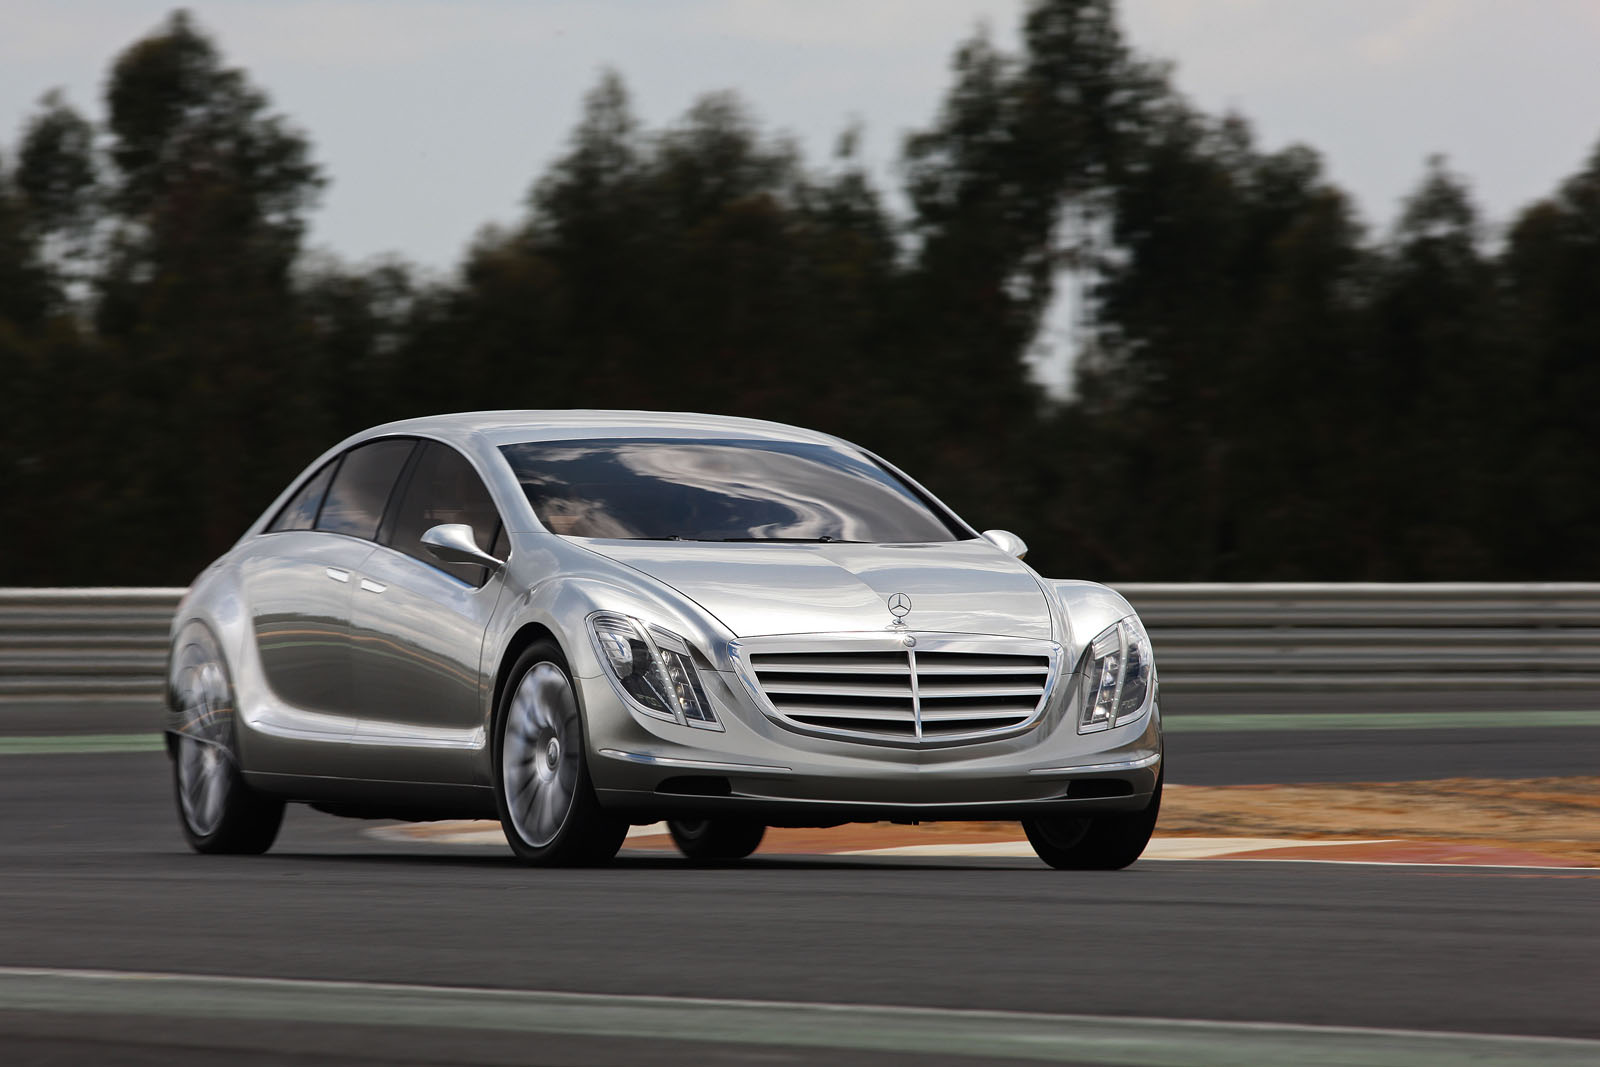 Mercedes-Benz F 700 Road to the Future